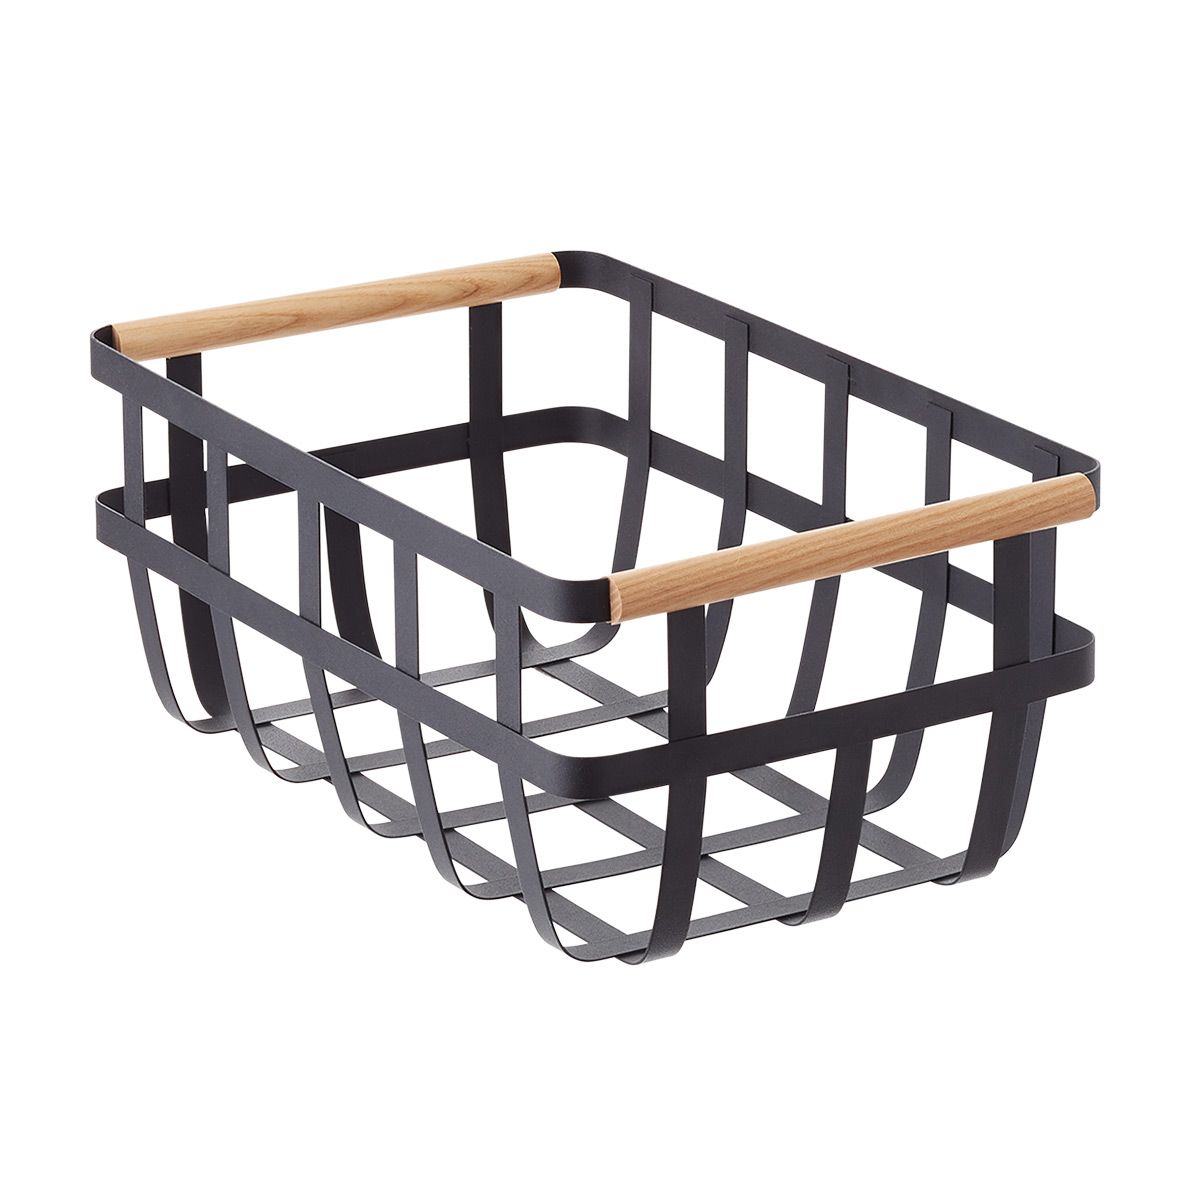 Yamazaki Tosca Basket w/ Wooden Handles Black/Natural | The Container Store